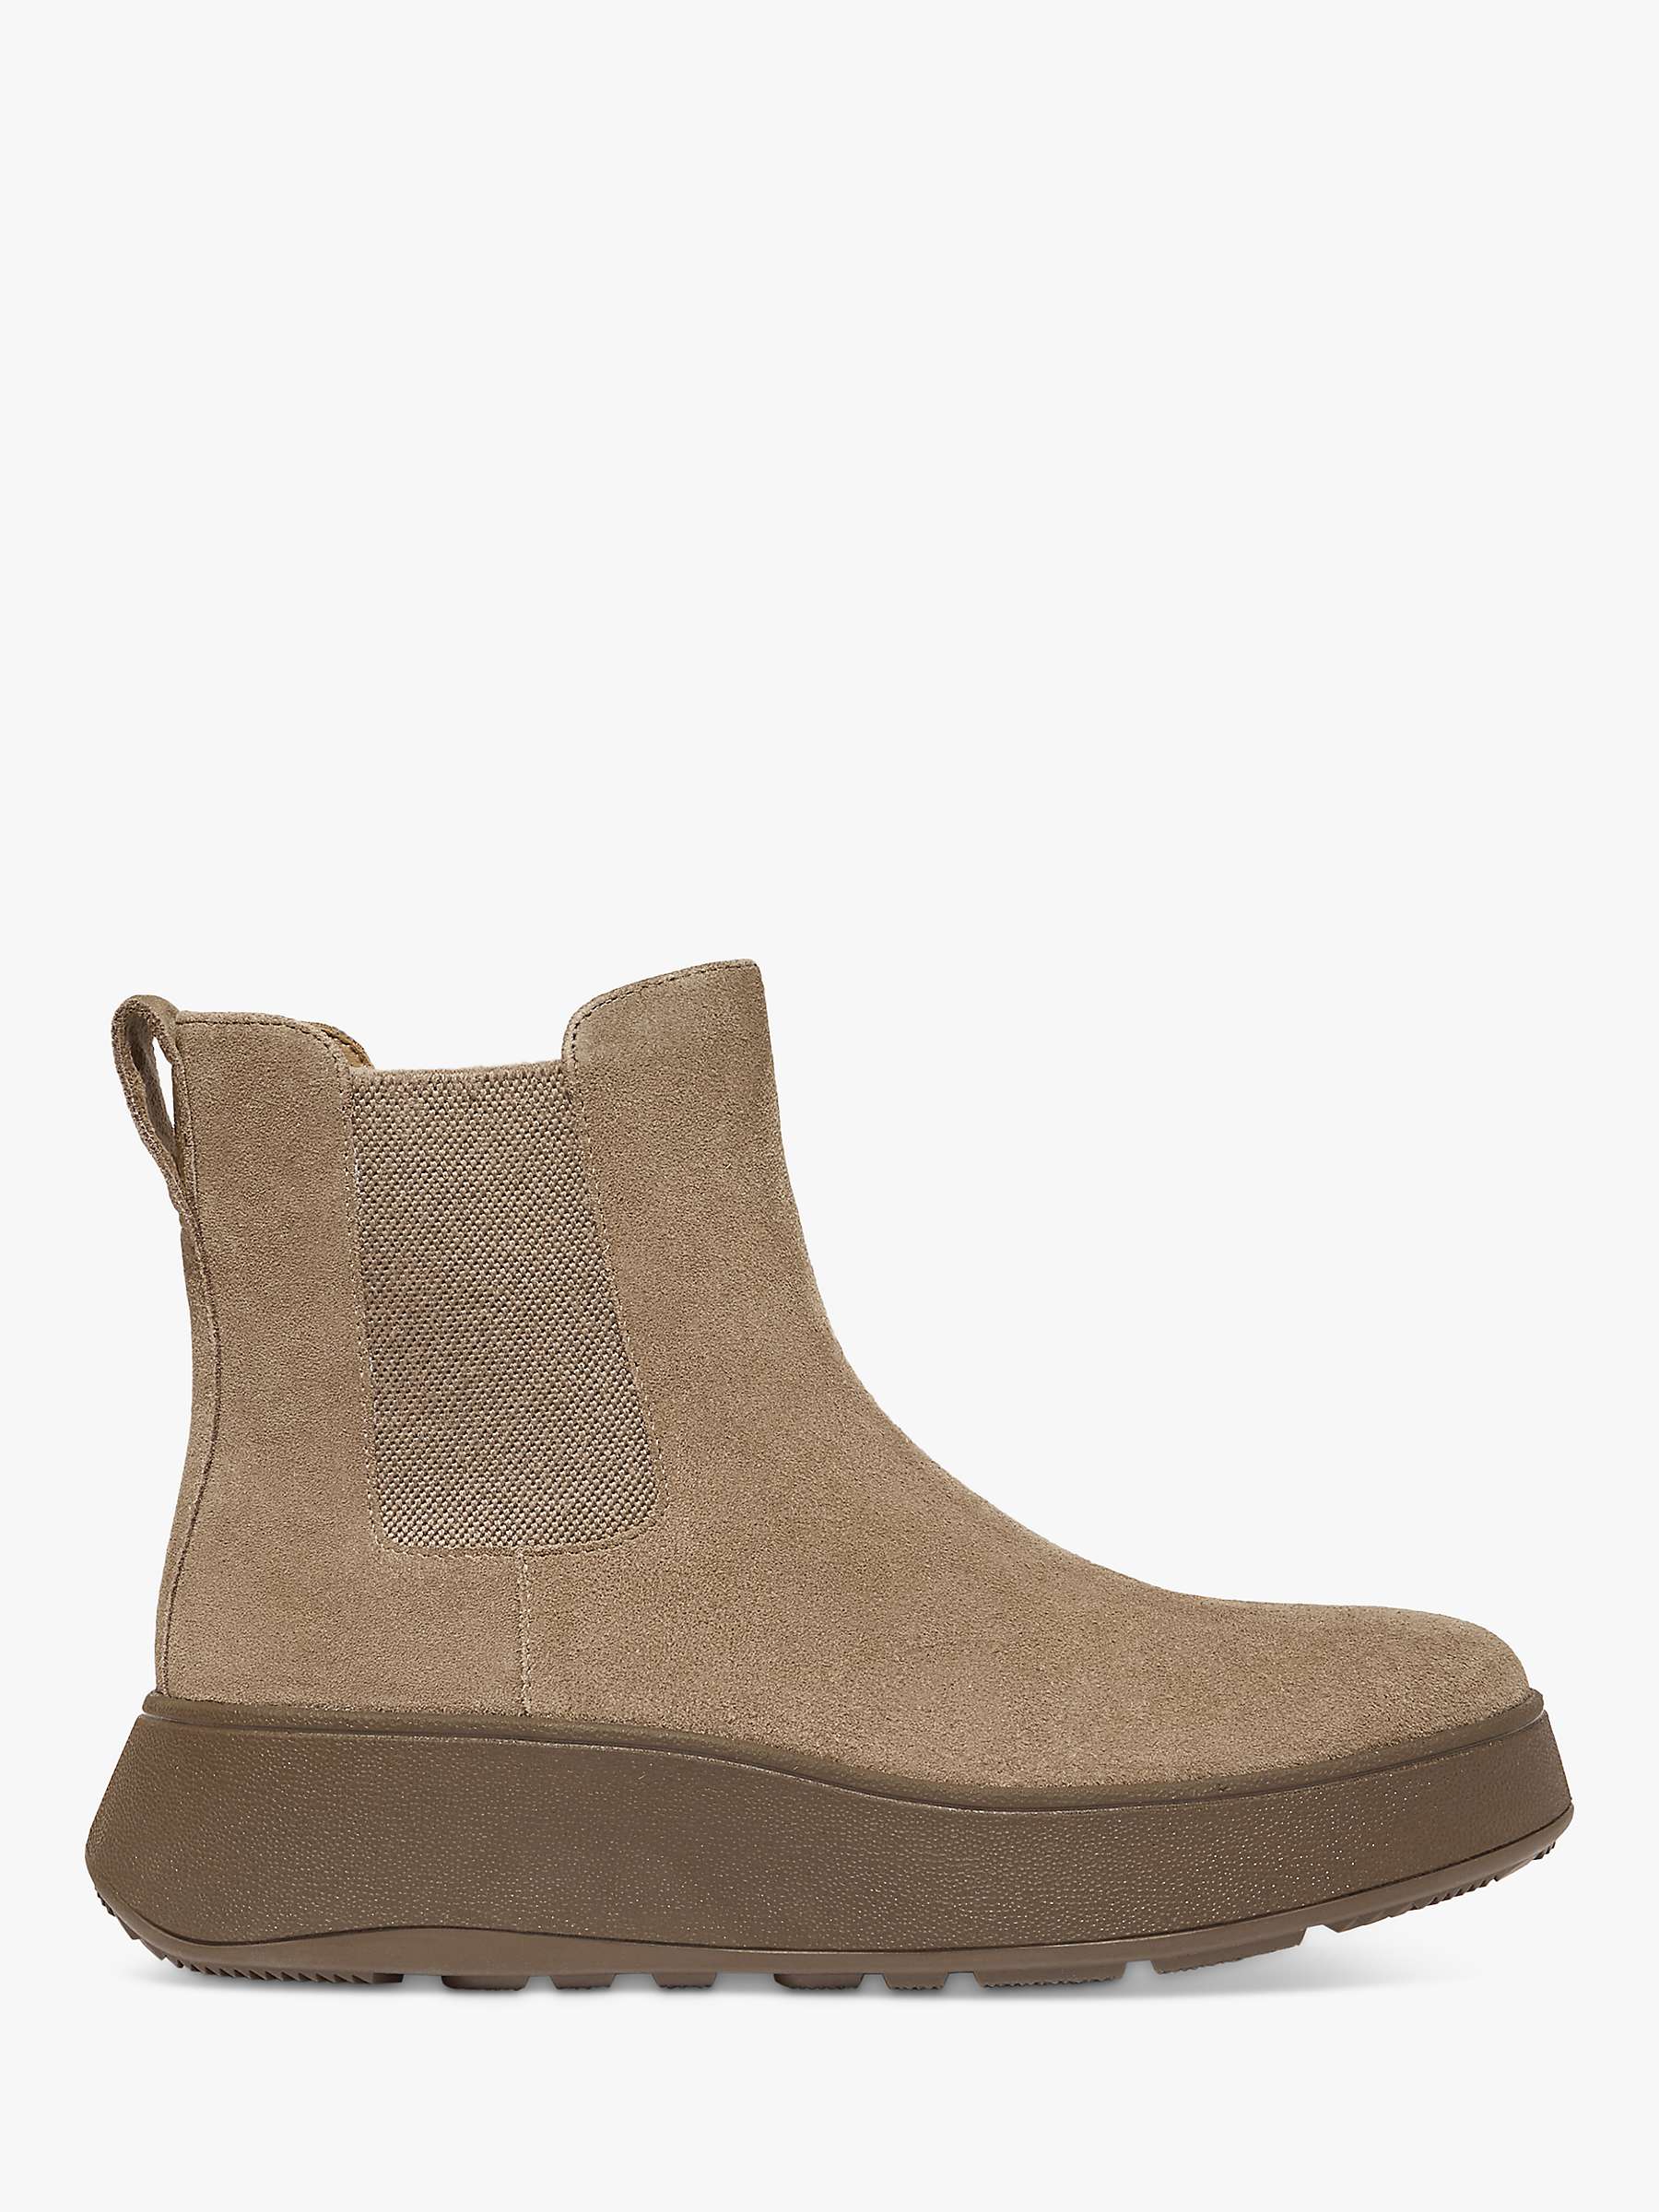 Buy FitFlop F-Mode Suede Chelsea Boots, Minky Grey Online at johnlewis.com